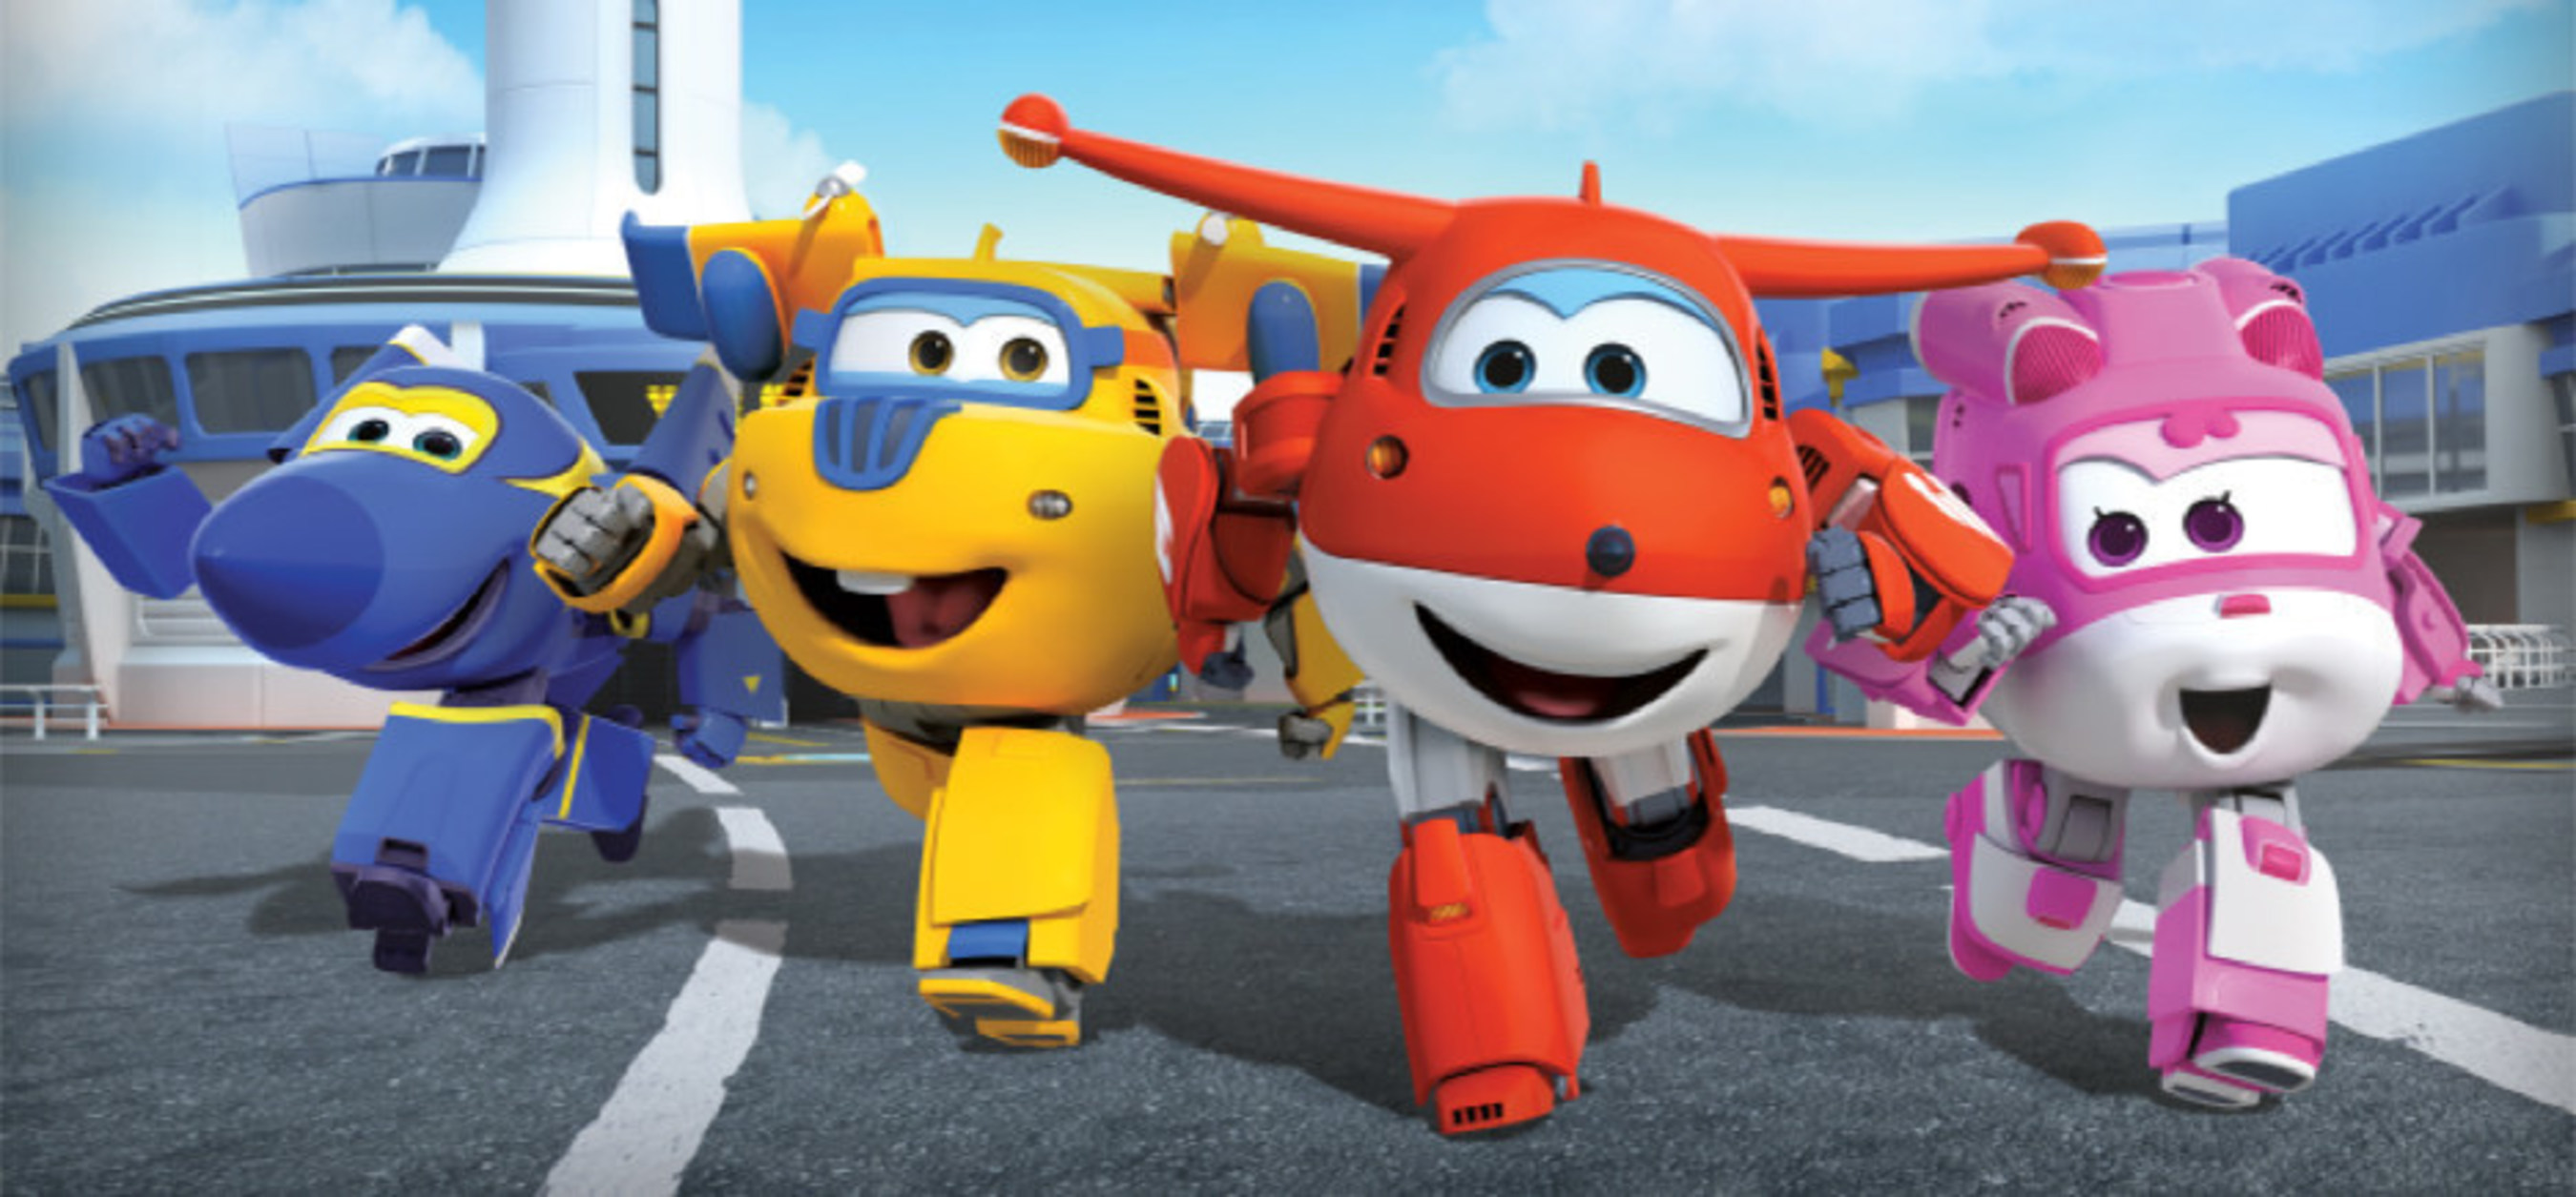 Super Wings Property Thrives After Successful Take Off in North America